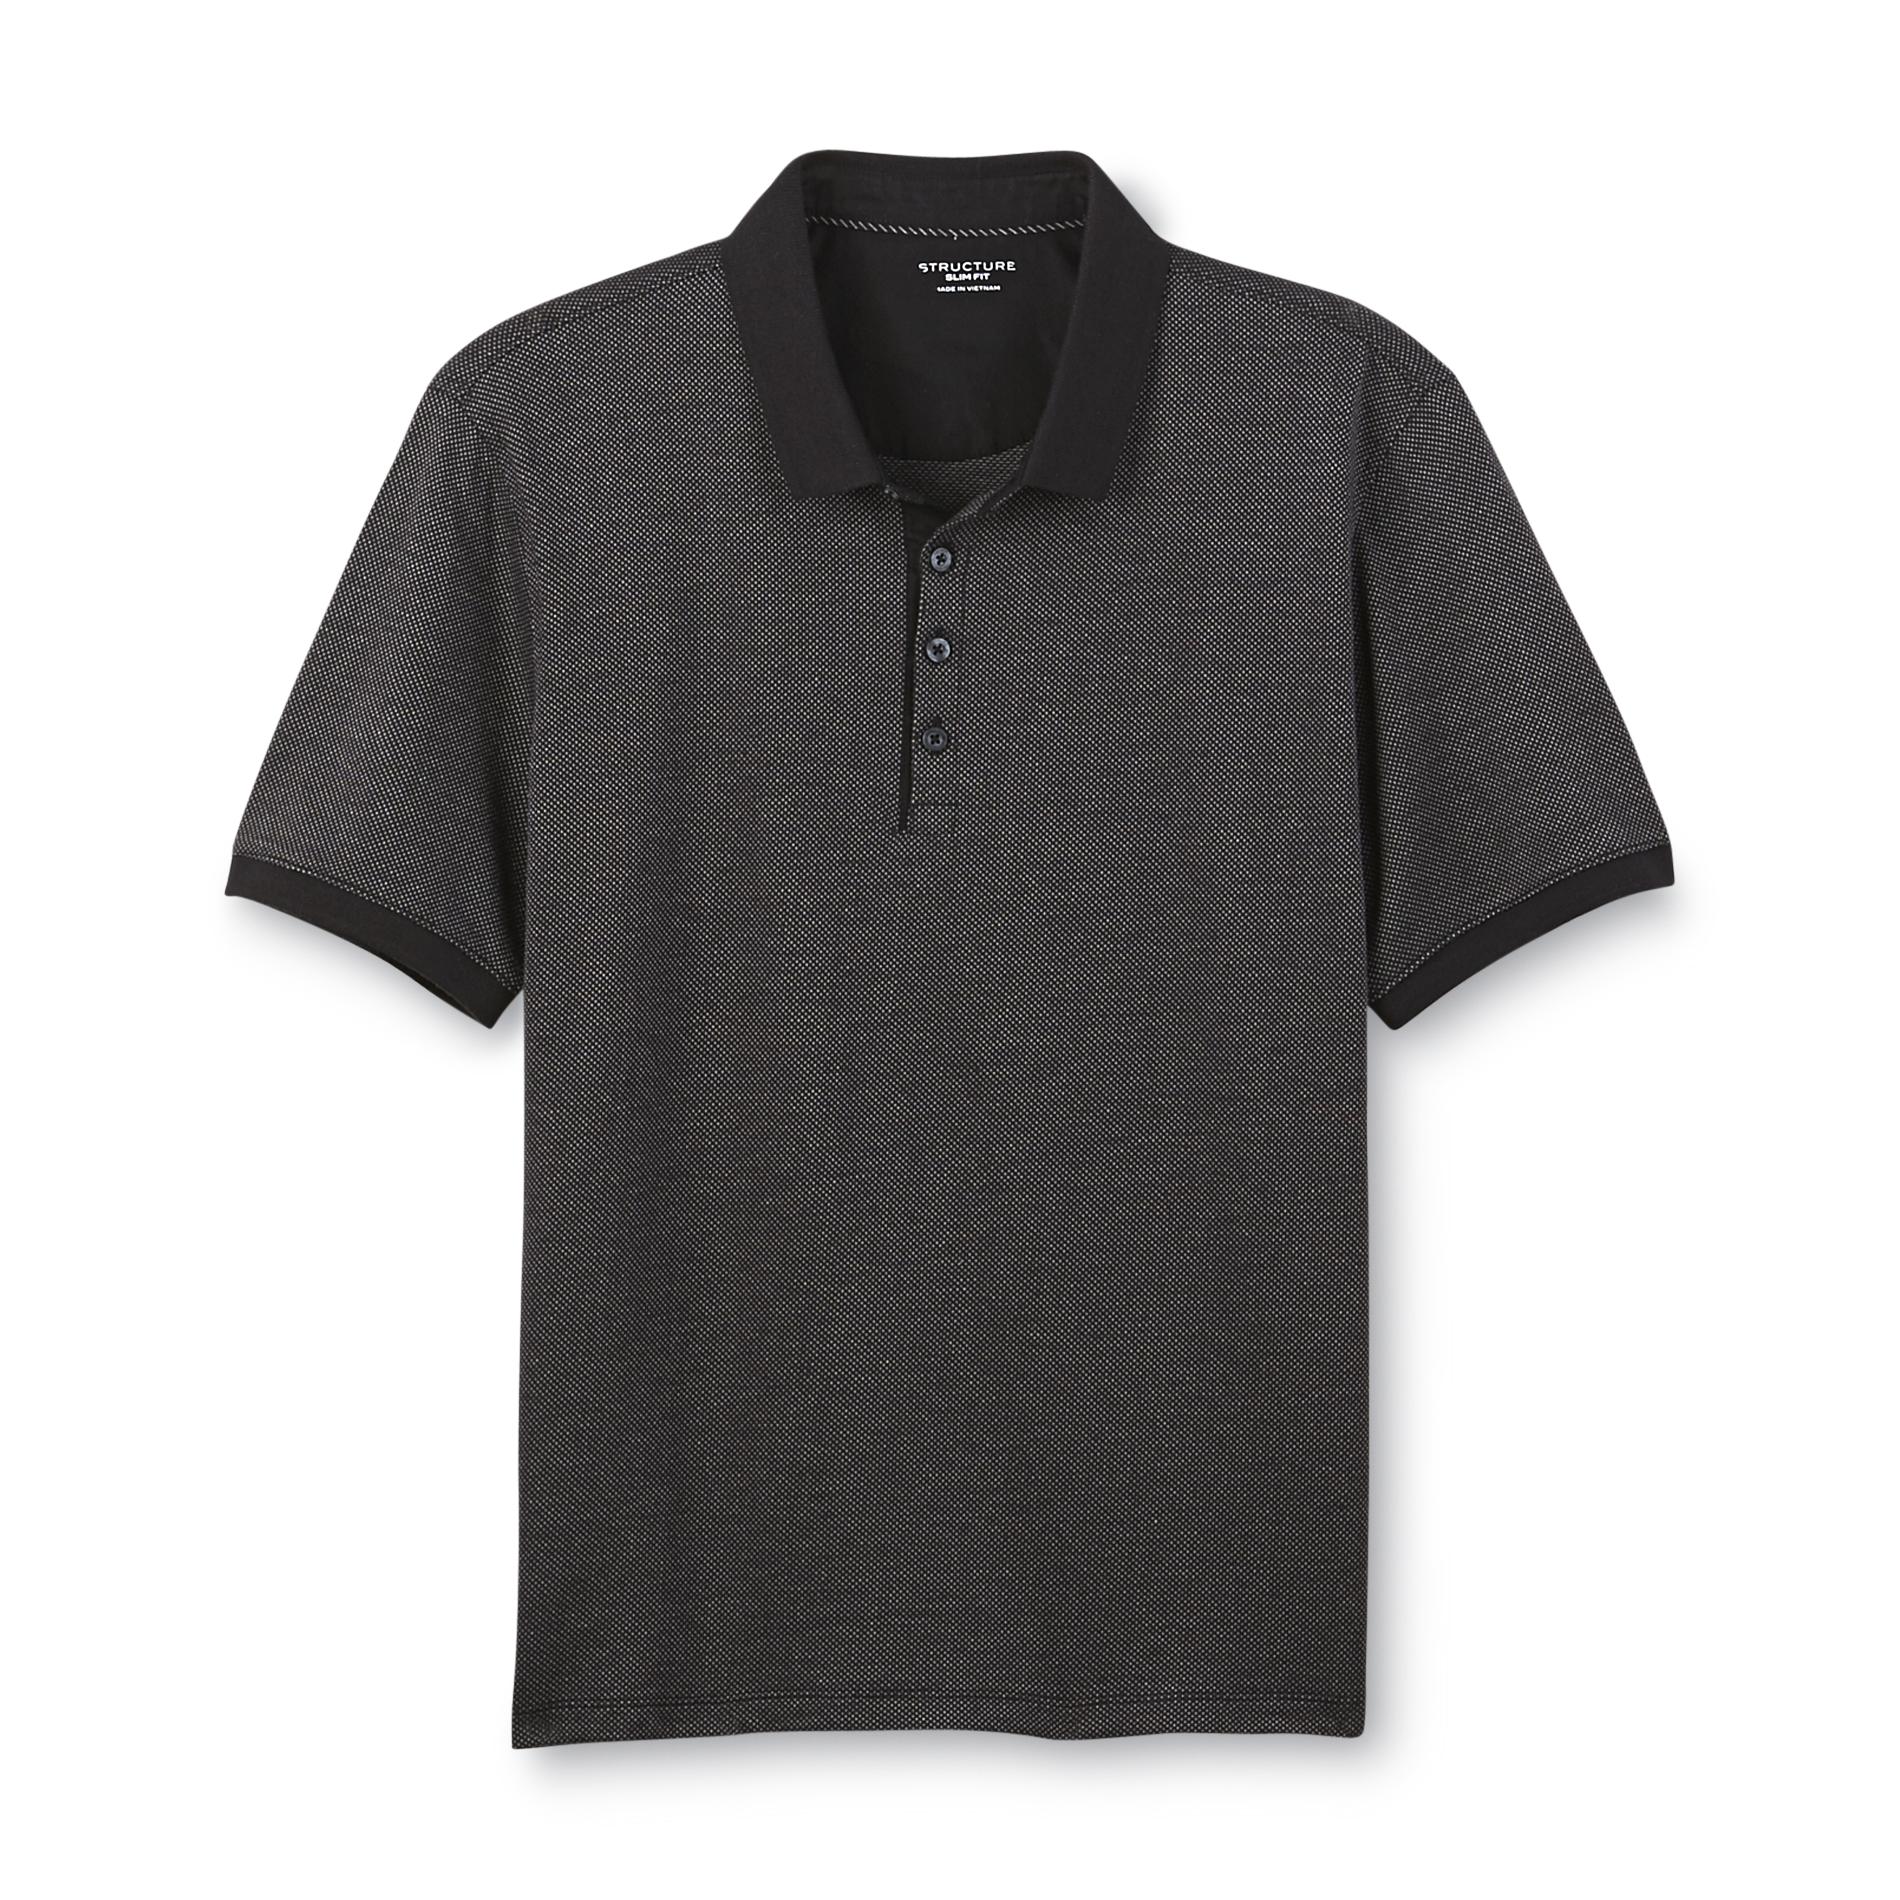 Structure Men's Slim Fit Polo Shirt - Micro-Check